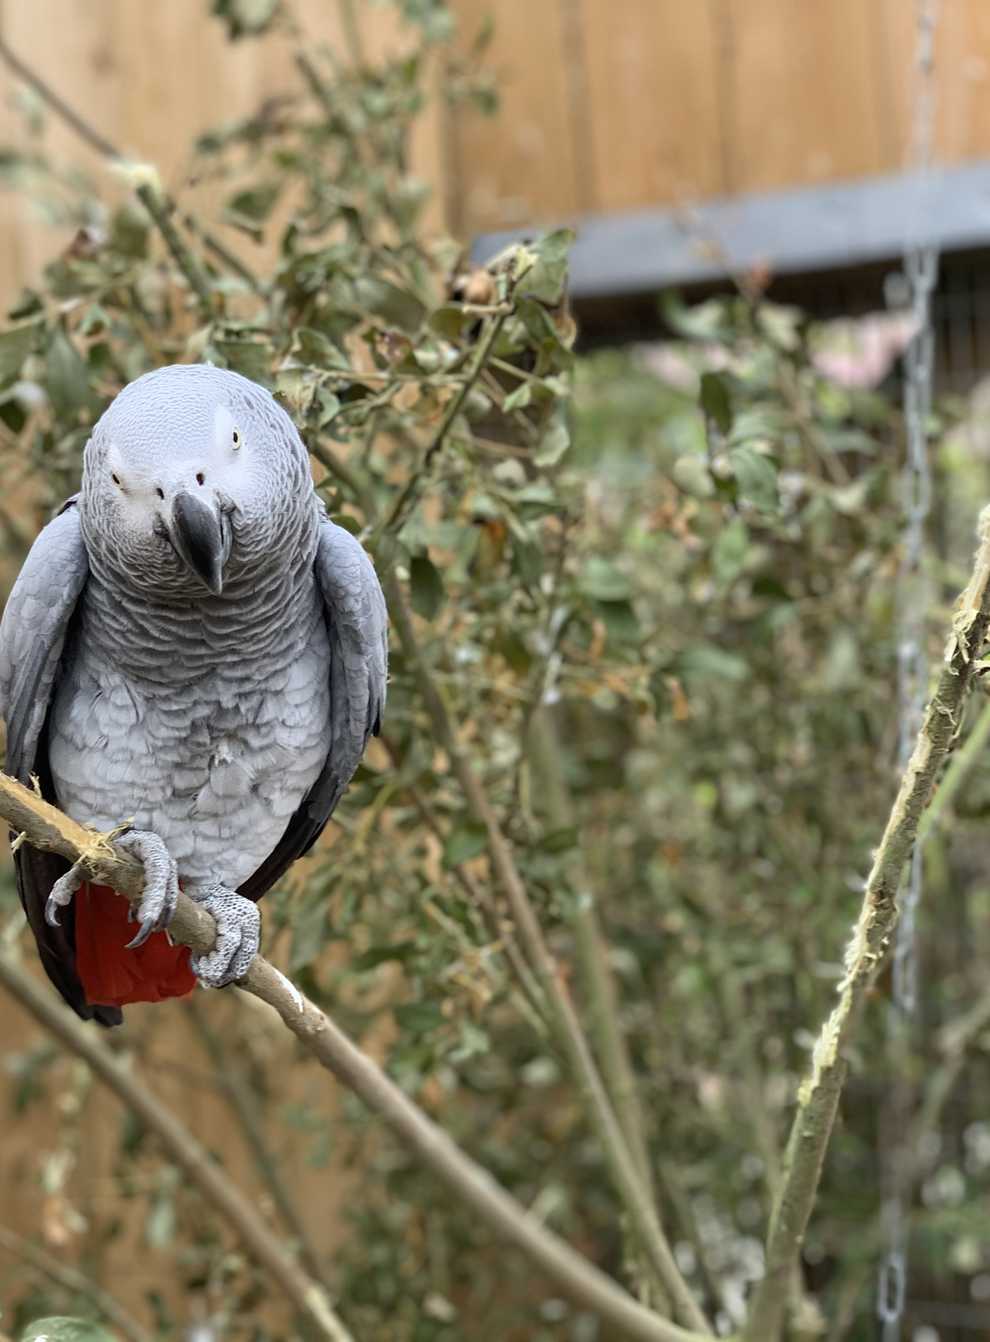 Firefighters warned pet owners of the dangers involved in attempting to rescue parrots (Lincolnshire Wildlife Park/PA)